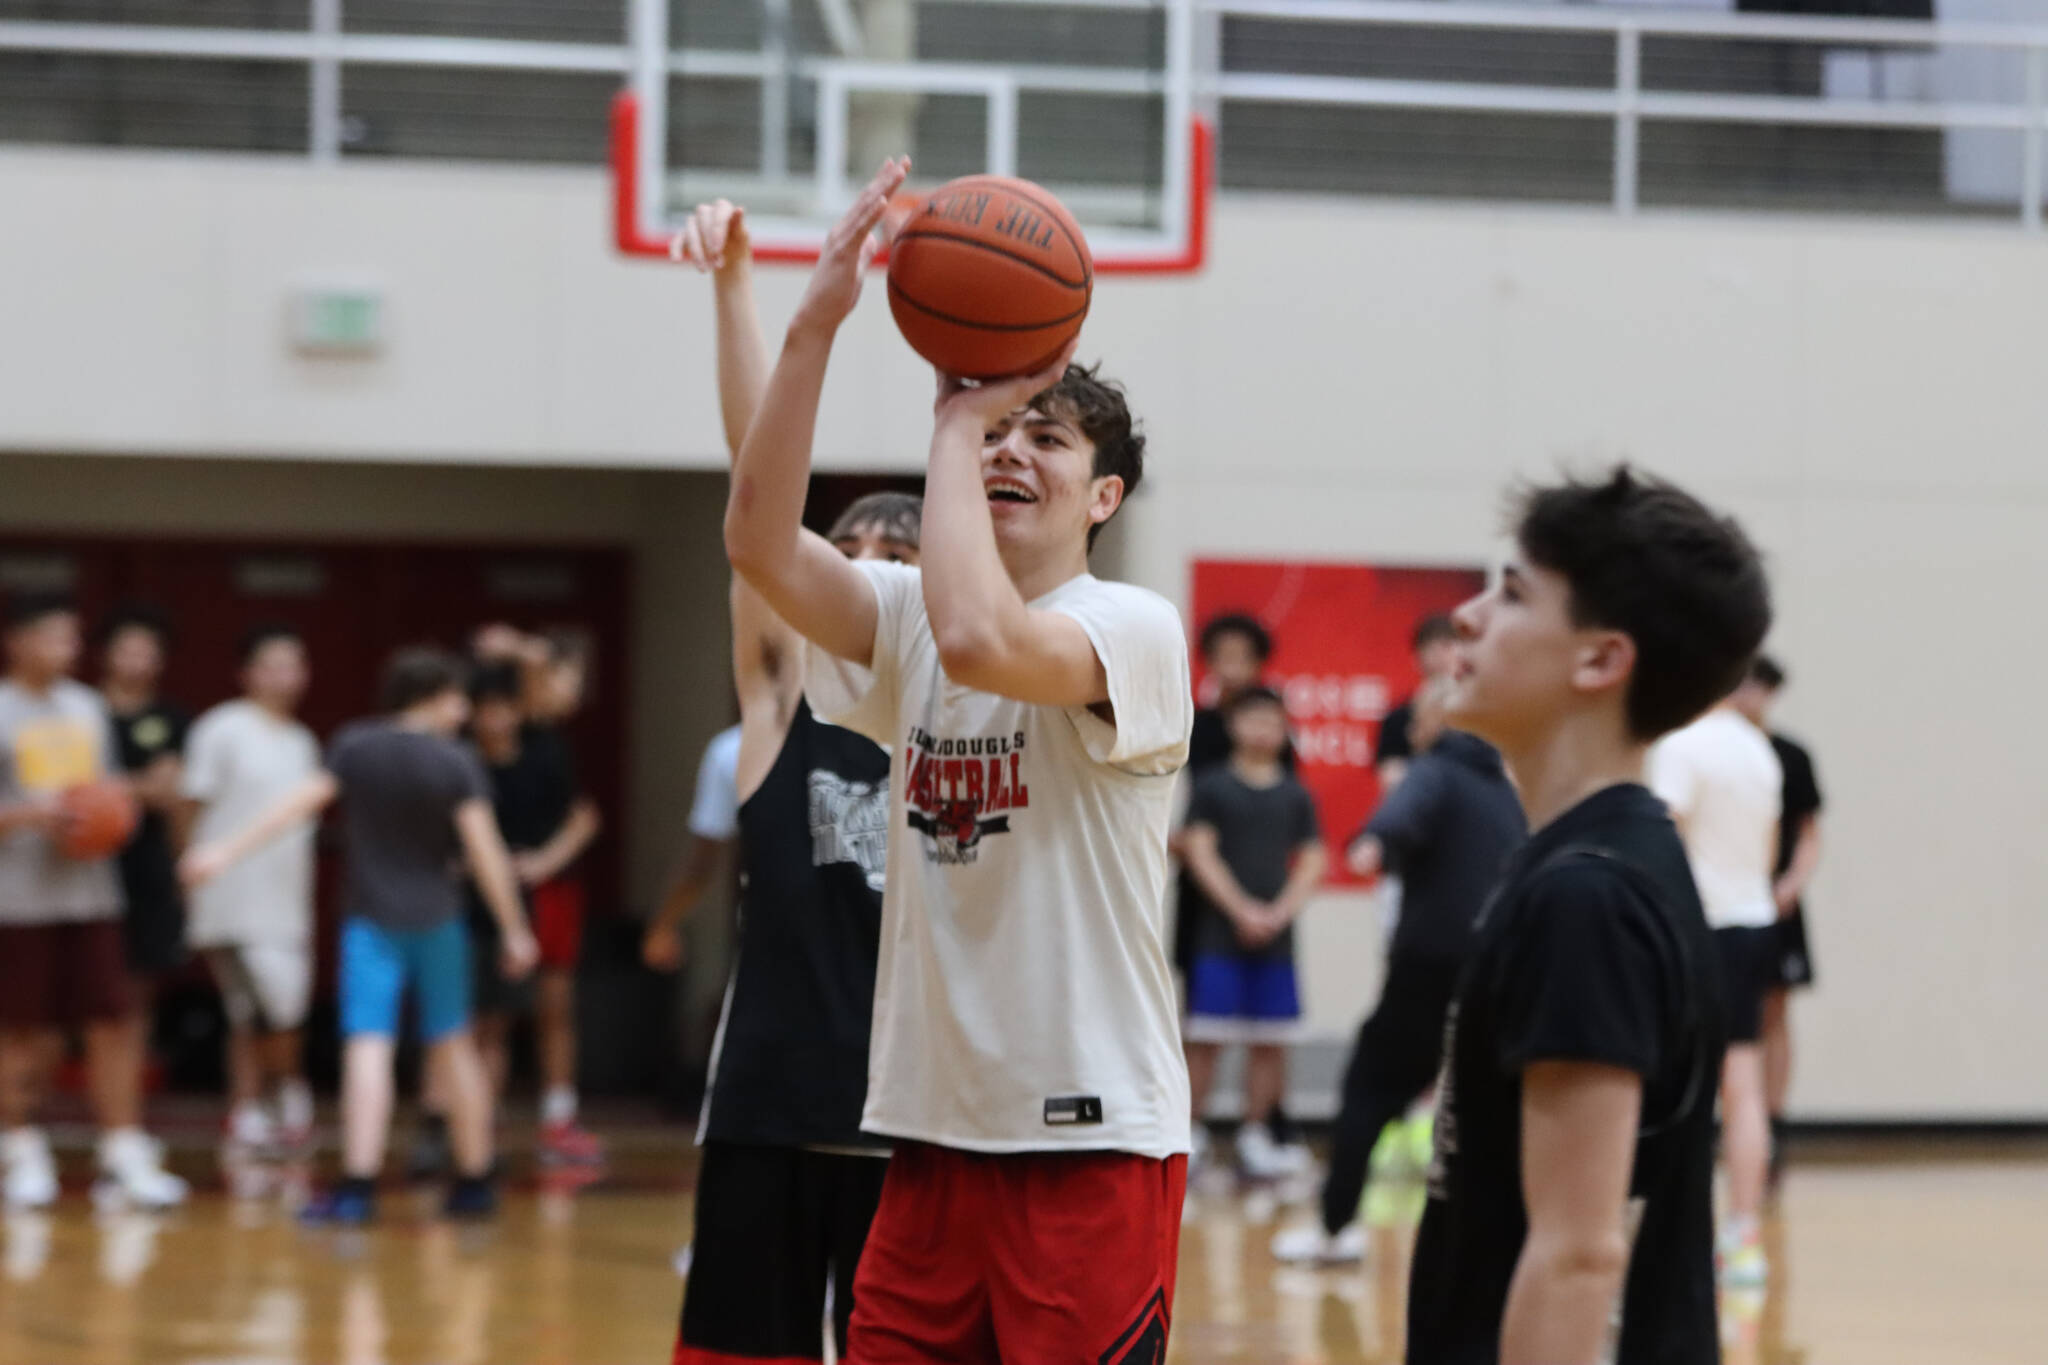 Jonson Kuhn / Juneau Empire 
From left to right, JDHS players seniors Joey Aline, Orion Dybdahl and freshman Brandon Casperson work on free throws during a Wednesday night practice.